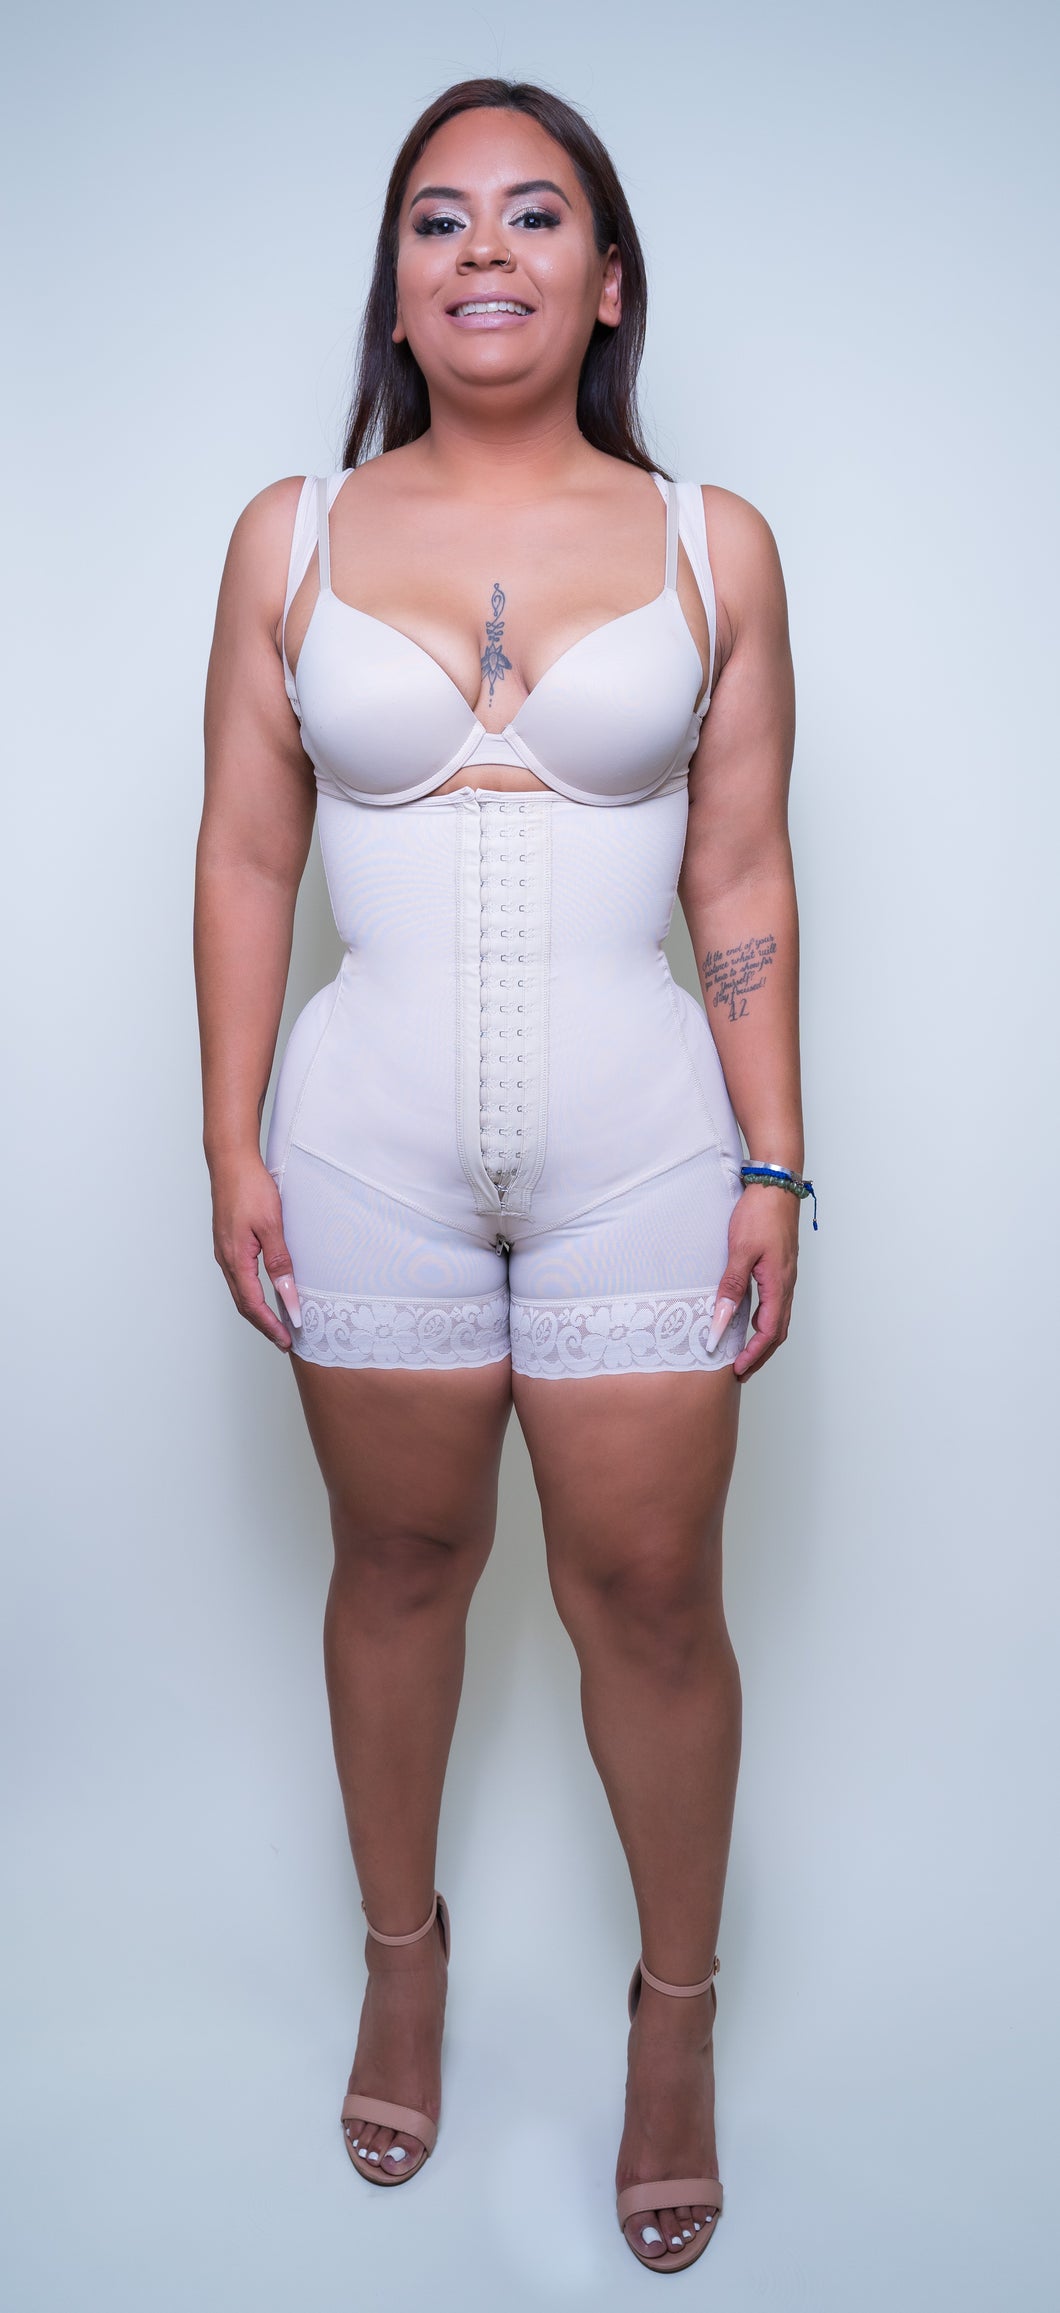 Our Full Body Shapewear is designed to help create the ultimate hourglass figure. It helps reduce your waist line while lifting and accentuating your booty.